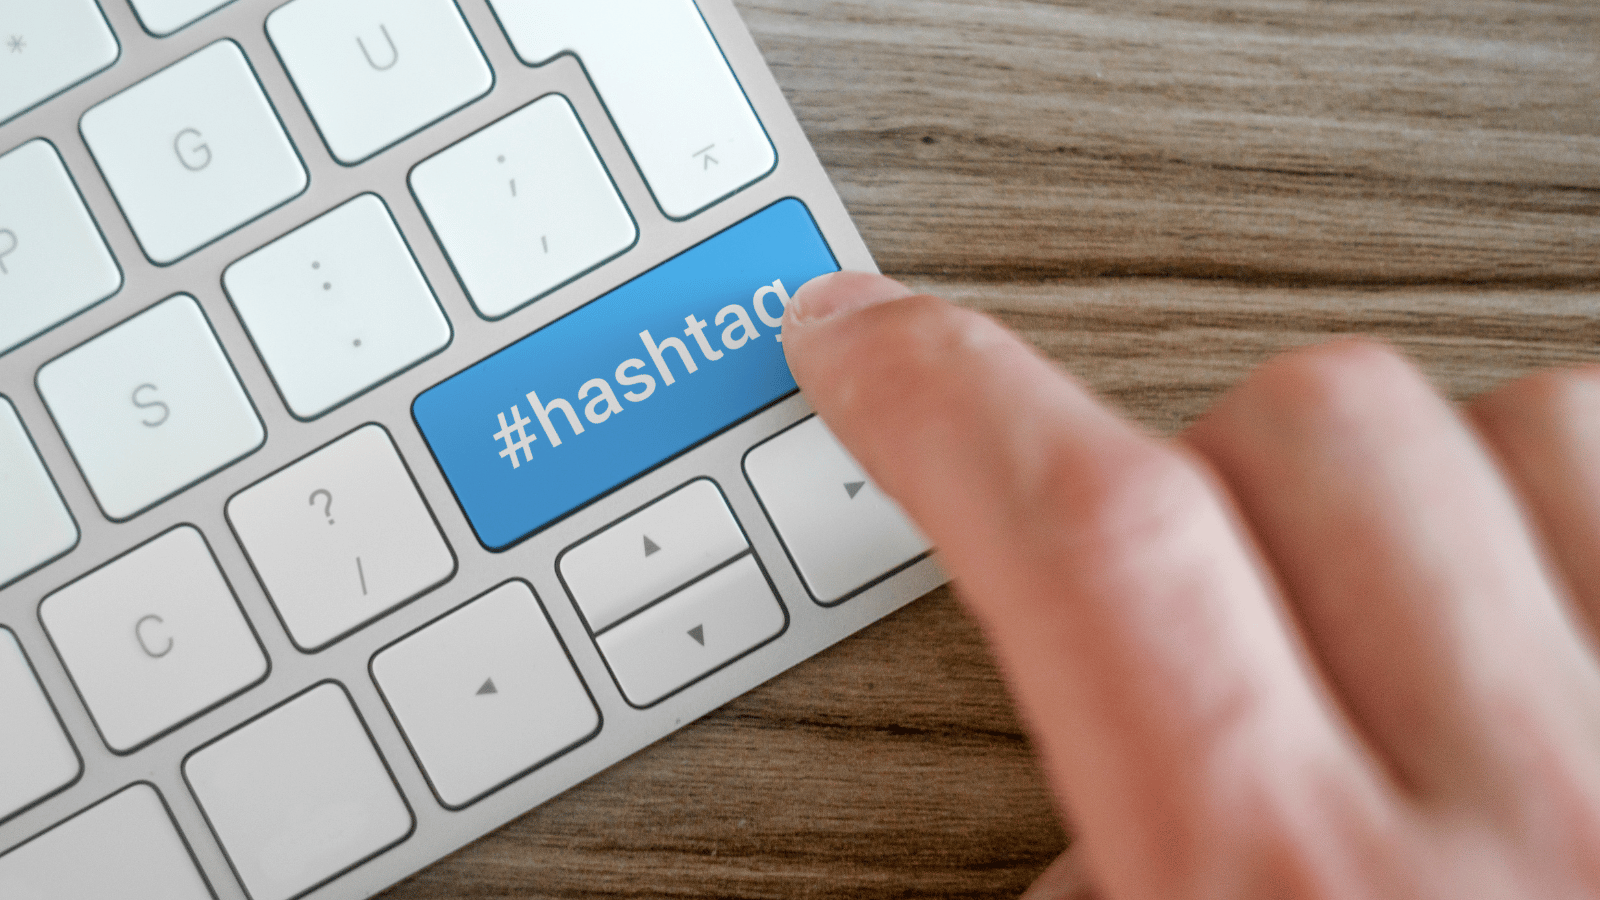 How universities can use hashtags properly